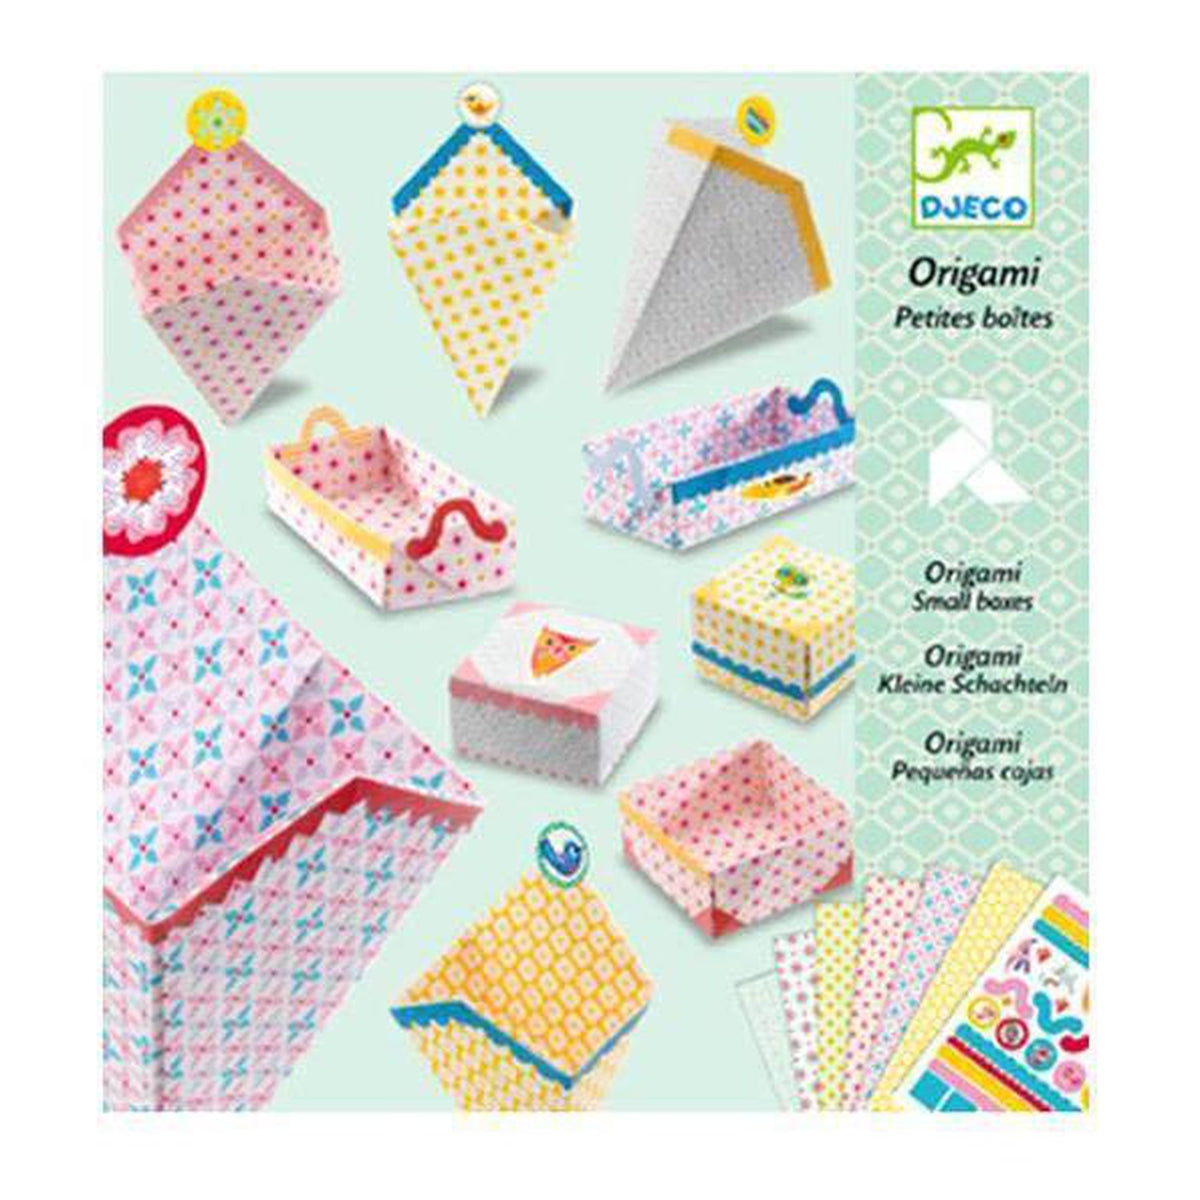 https://dillydallykids.ca/cdn/shop/products/djeco-small-boxes-origami-kit-arts-crafts-djeco.jpg?v=1632358490&width=1200